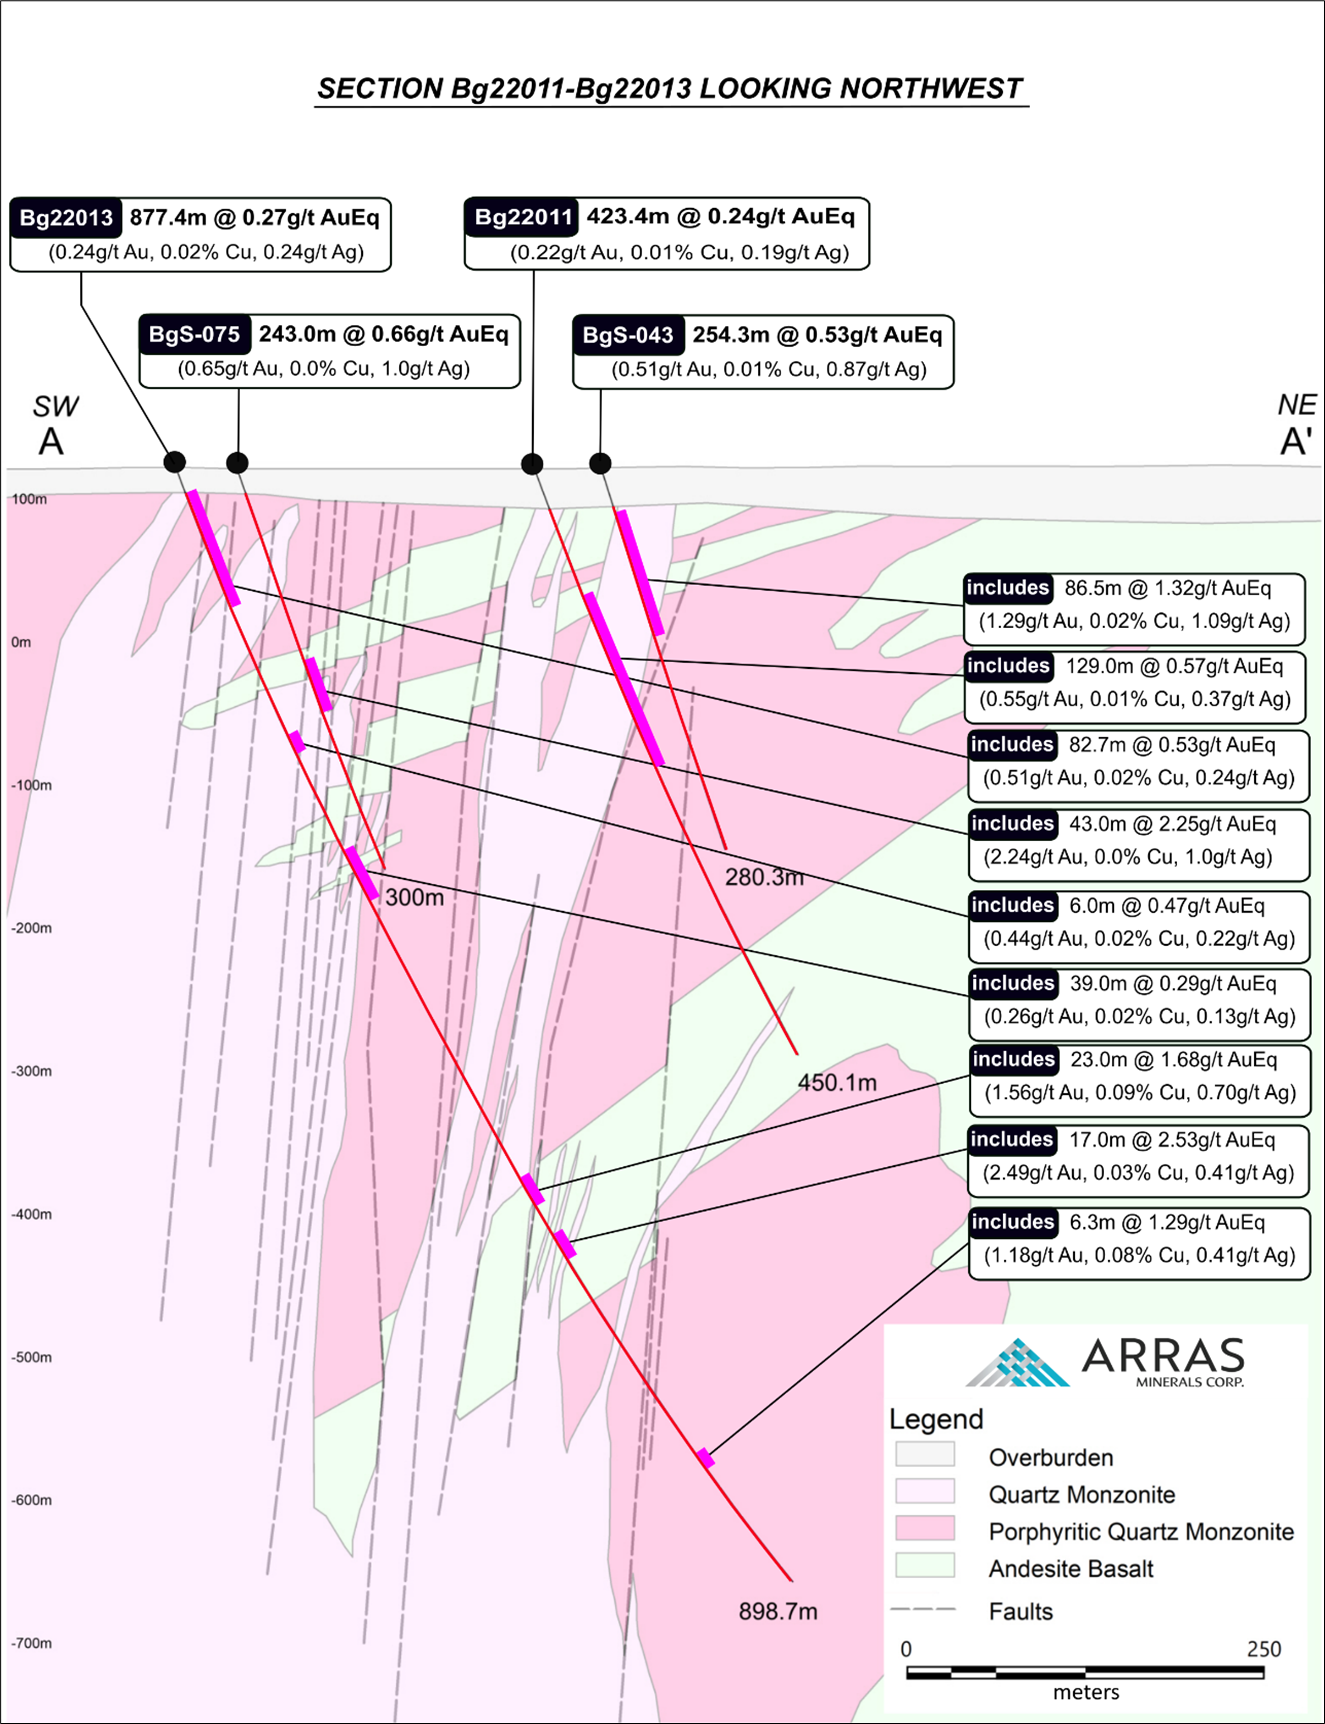 Cross-section showing drill holes Bg22011 and Bg22013 in relation to historical holes drilled by Copperbelt. AuEq grades of key intercepts in Bg22011, Bg22013 and historical holes are shown. The cross-section demonstrates structurally controlled mineralization largely focused in the contacts between steep, southwest dipping quartz monzonite intrusion and surrounding porphyritic quartz monzonite and andesite basalts.